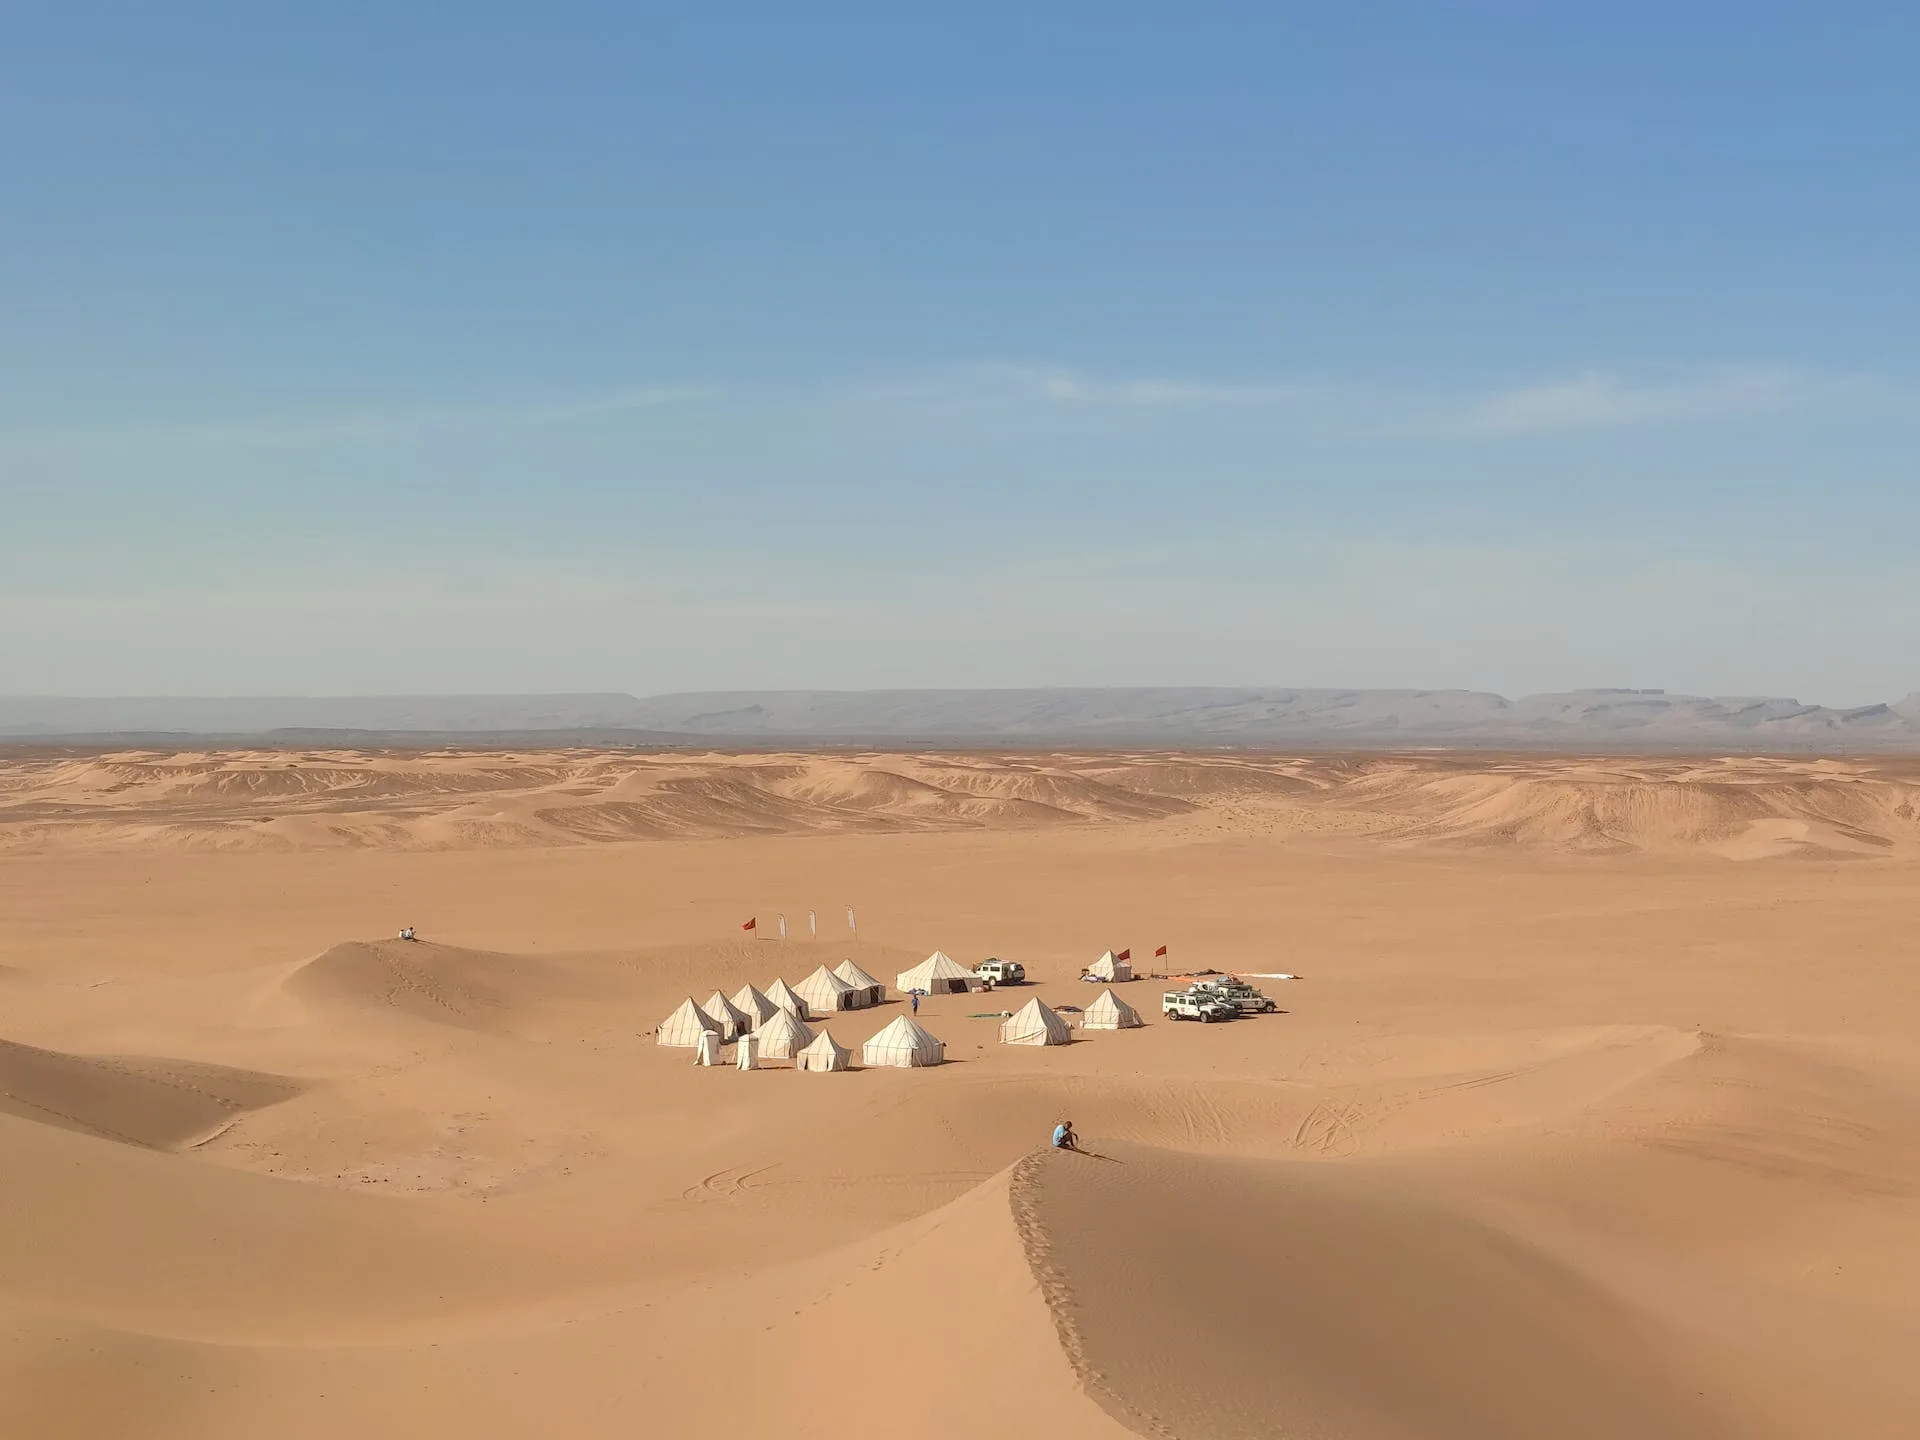 A Person Sitting on Sand Dune Near White Tents in Morocco